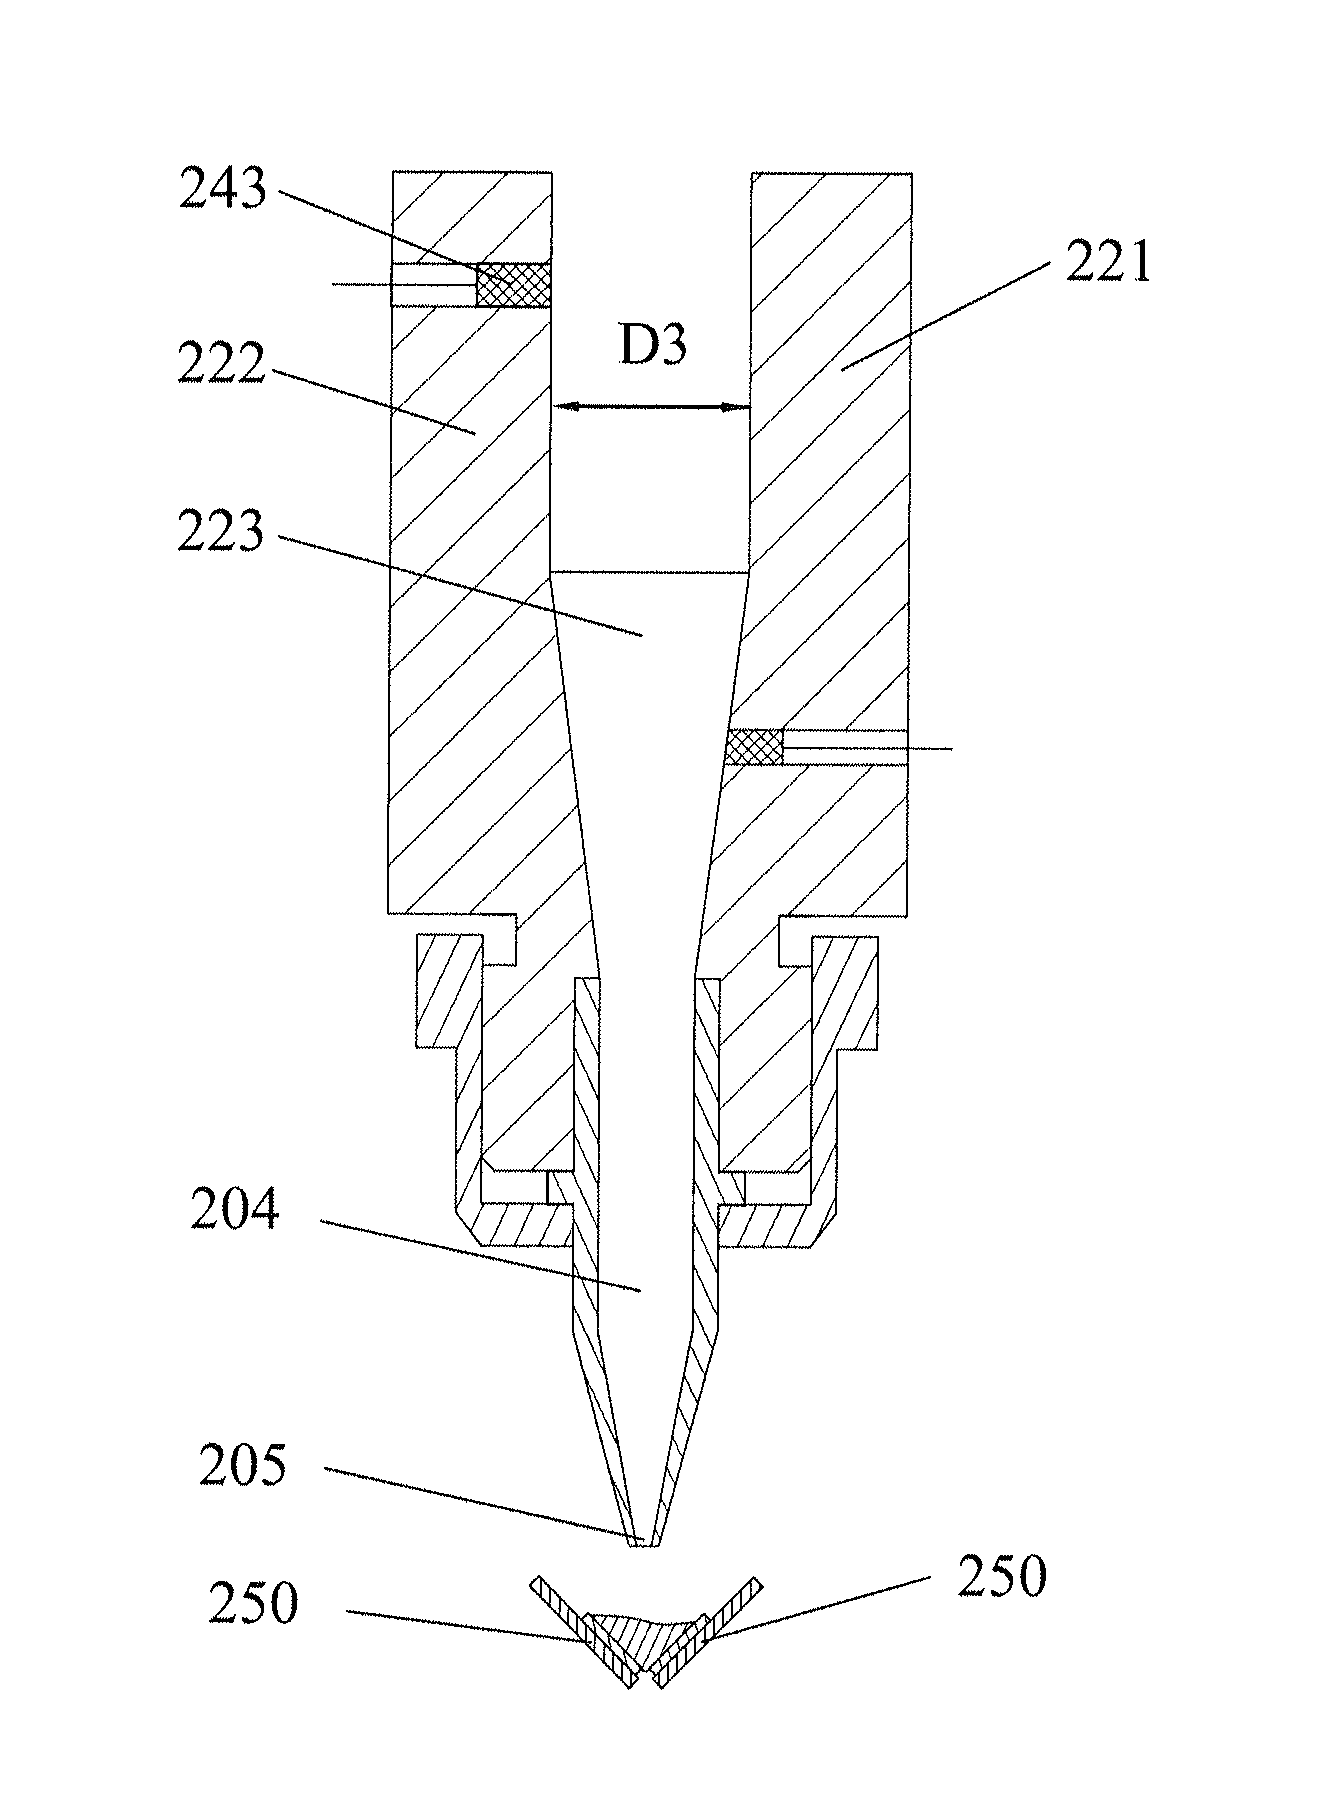 Apparatus and method for forming electrical solder connections in a disk drive unit